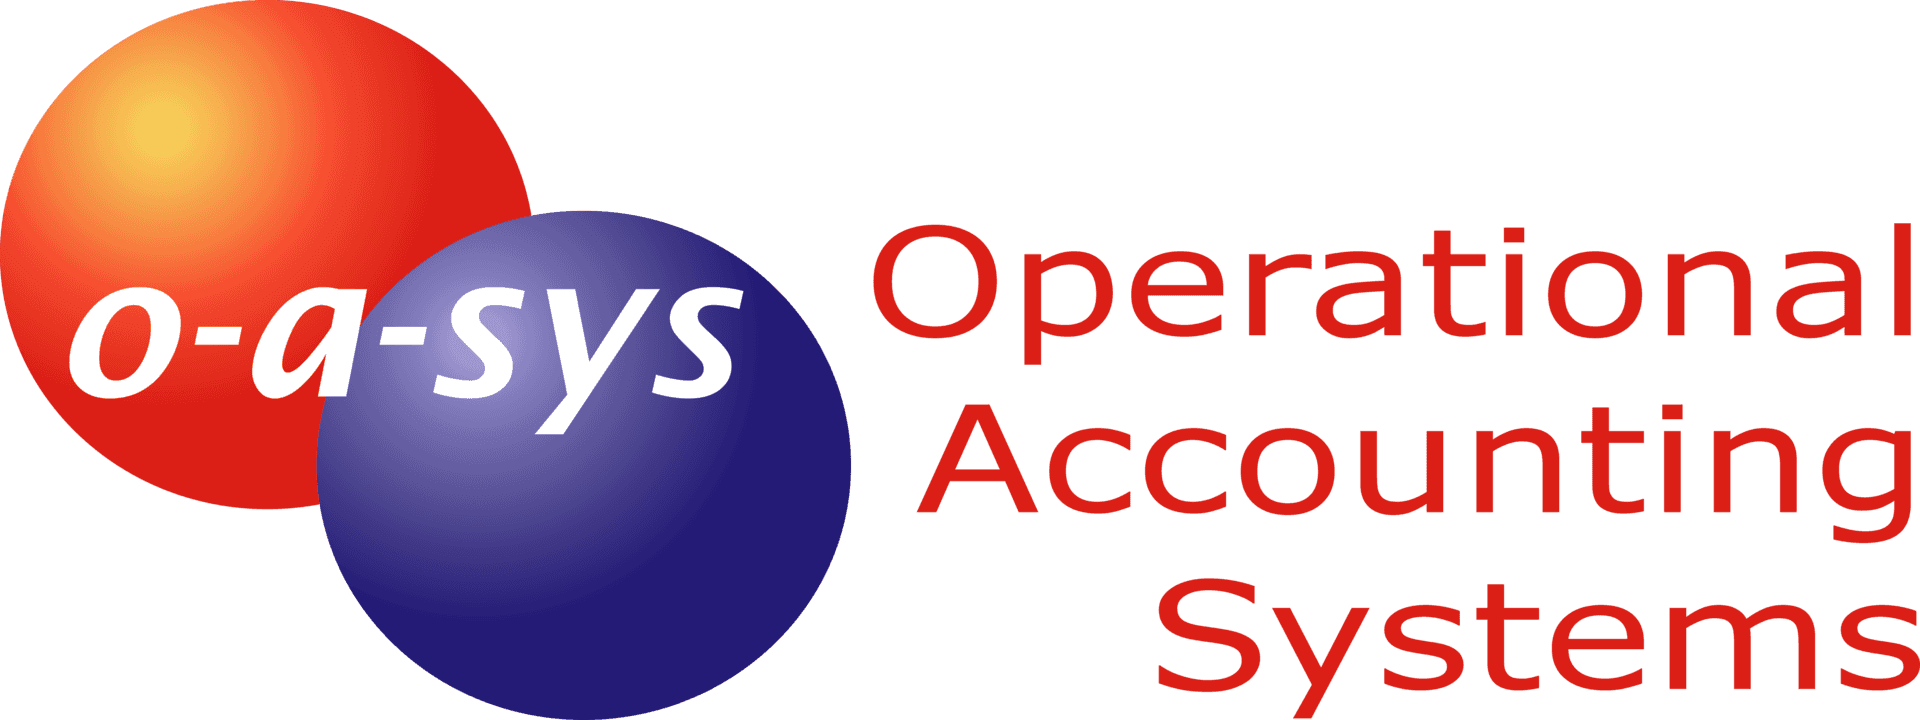 Operational Accounting Systems Logo